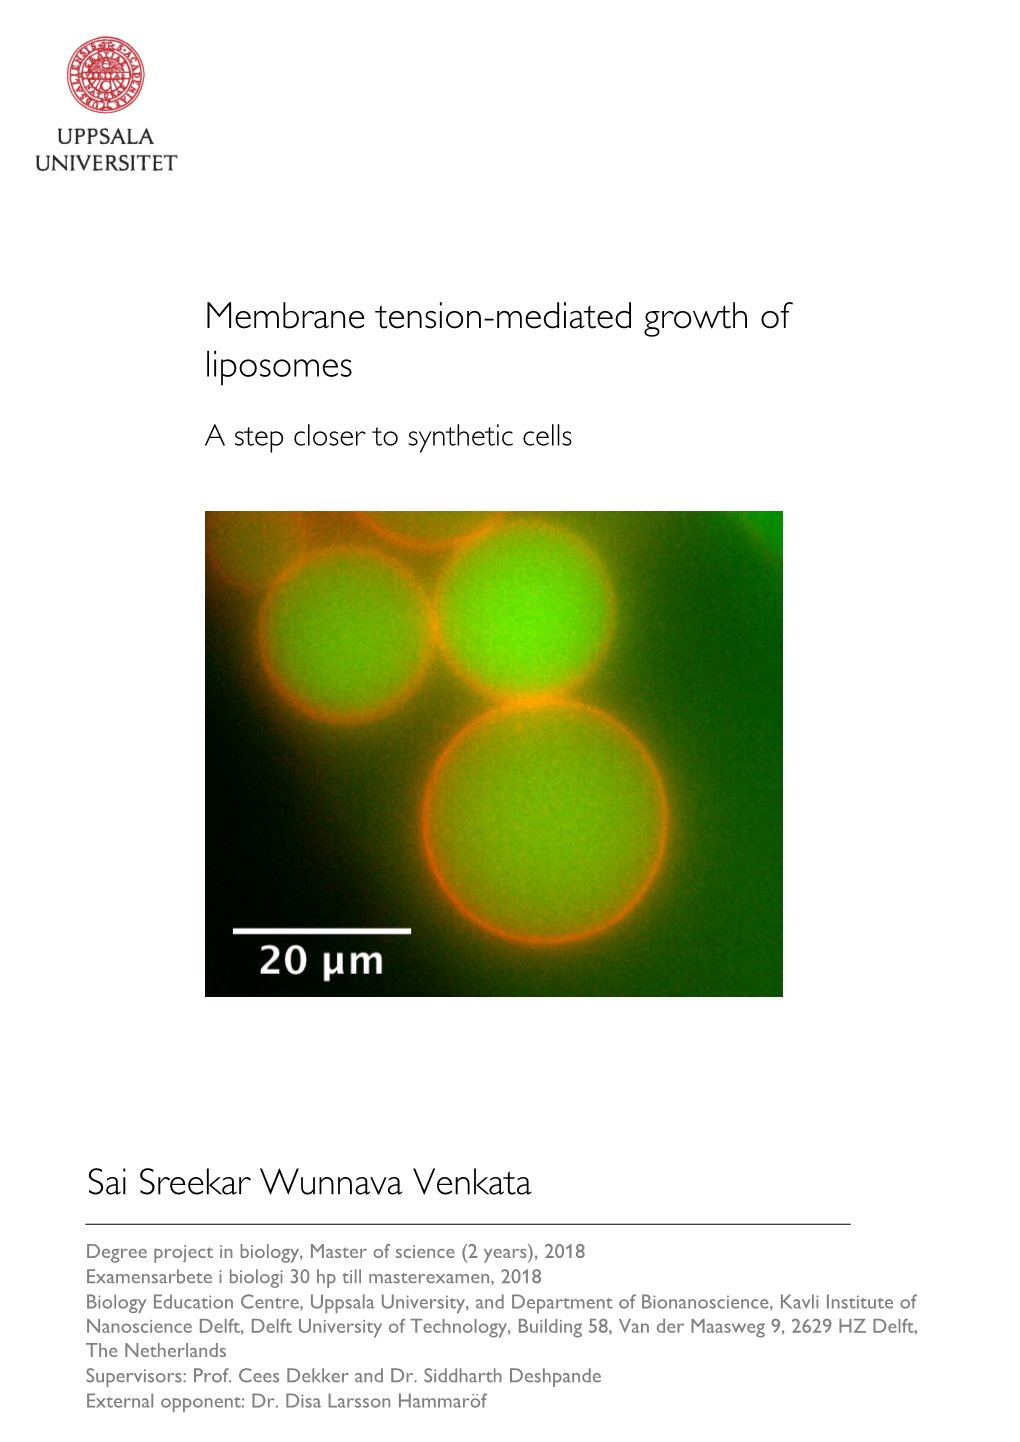 Membrane Tension-Mediated Growth of Liposomes